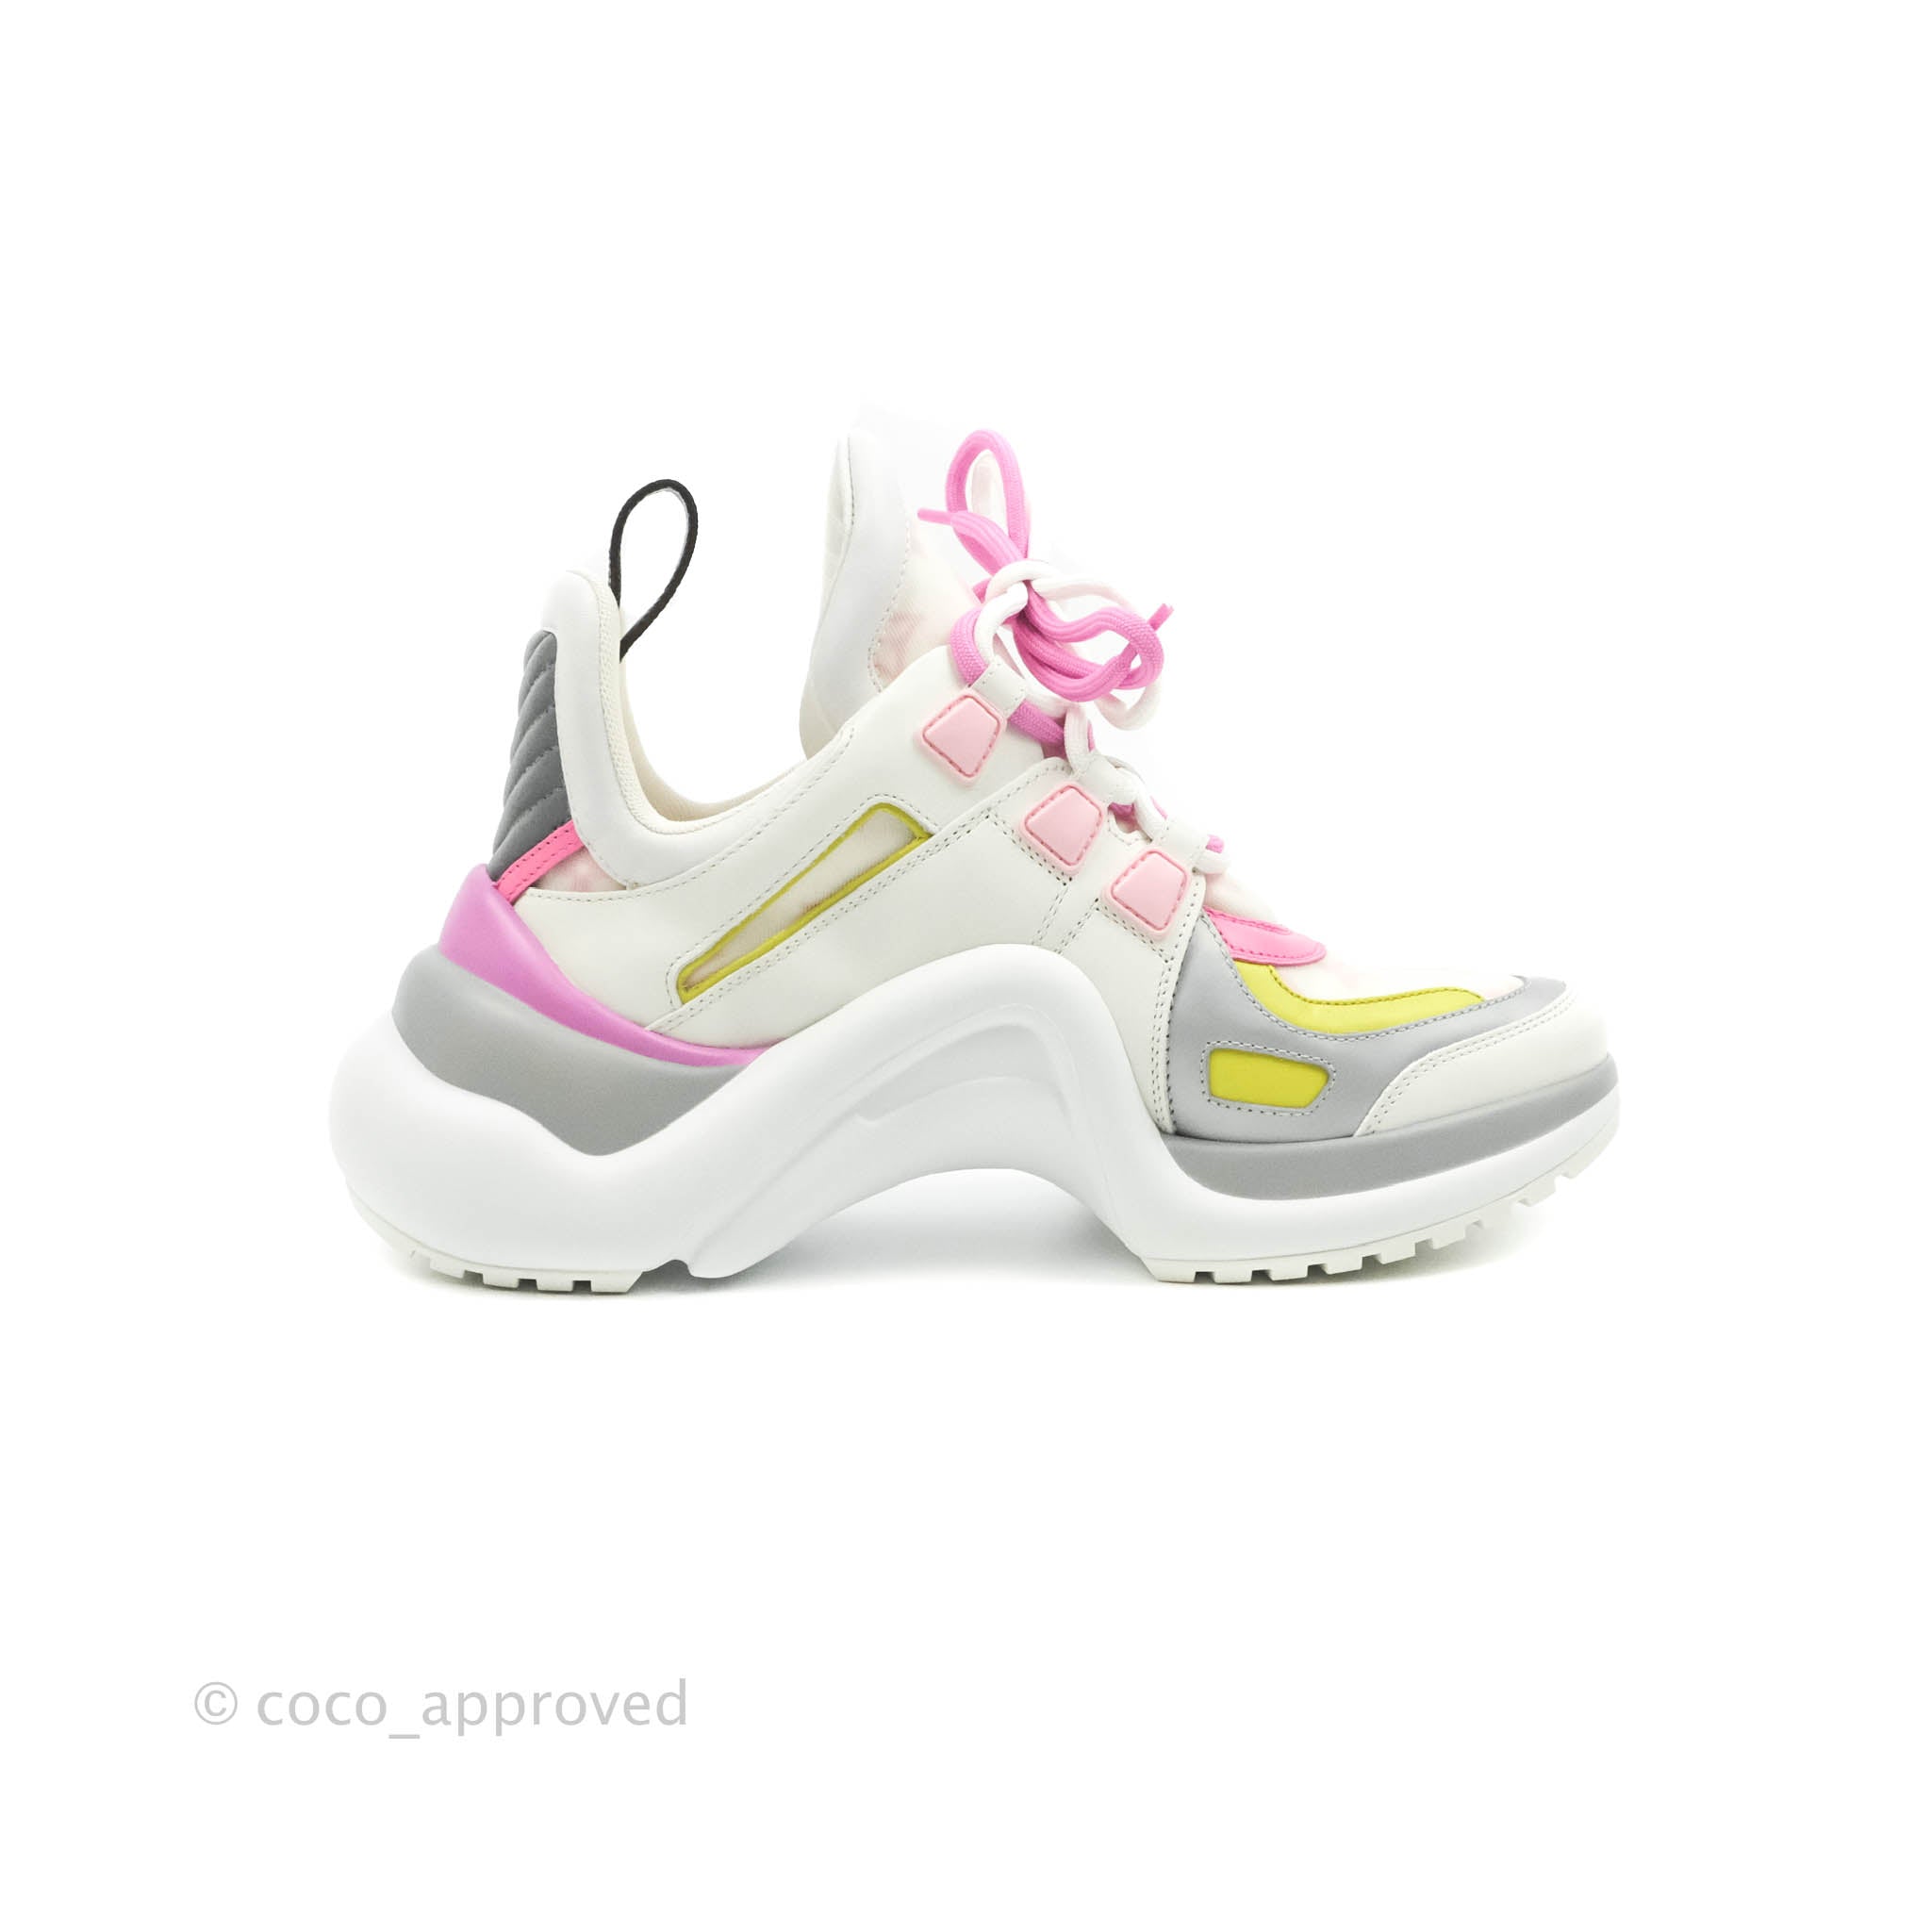 Louis Vuitton Lv Archlight Sneakers Pink in Metallic